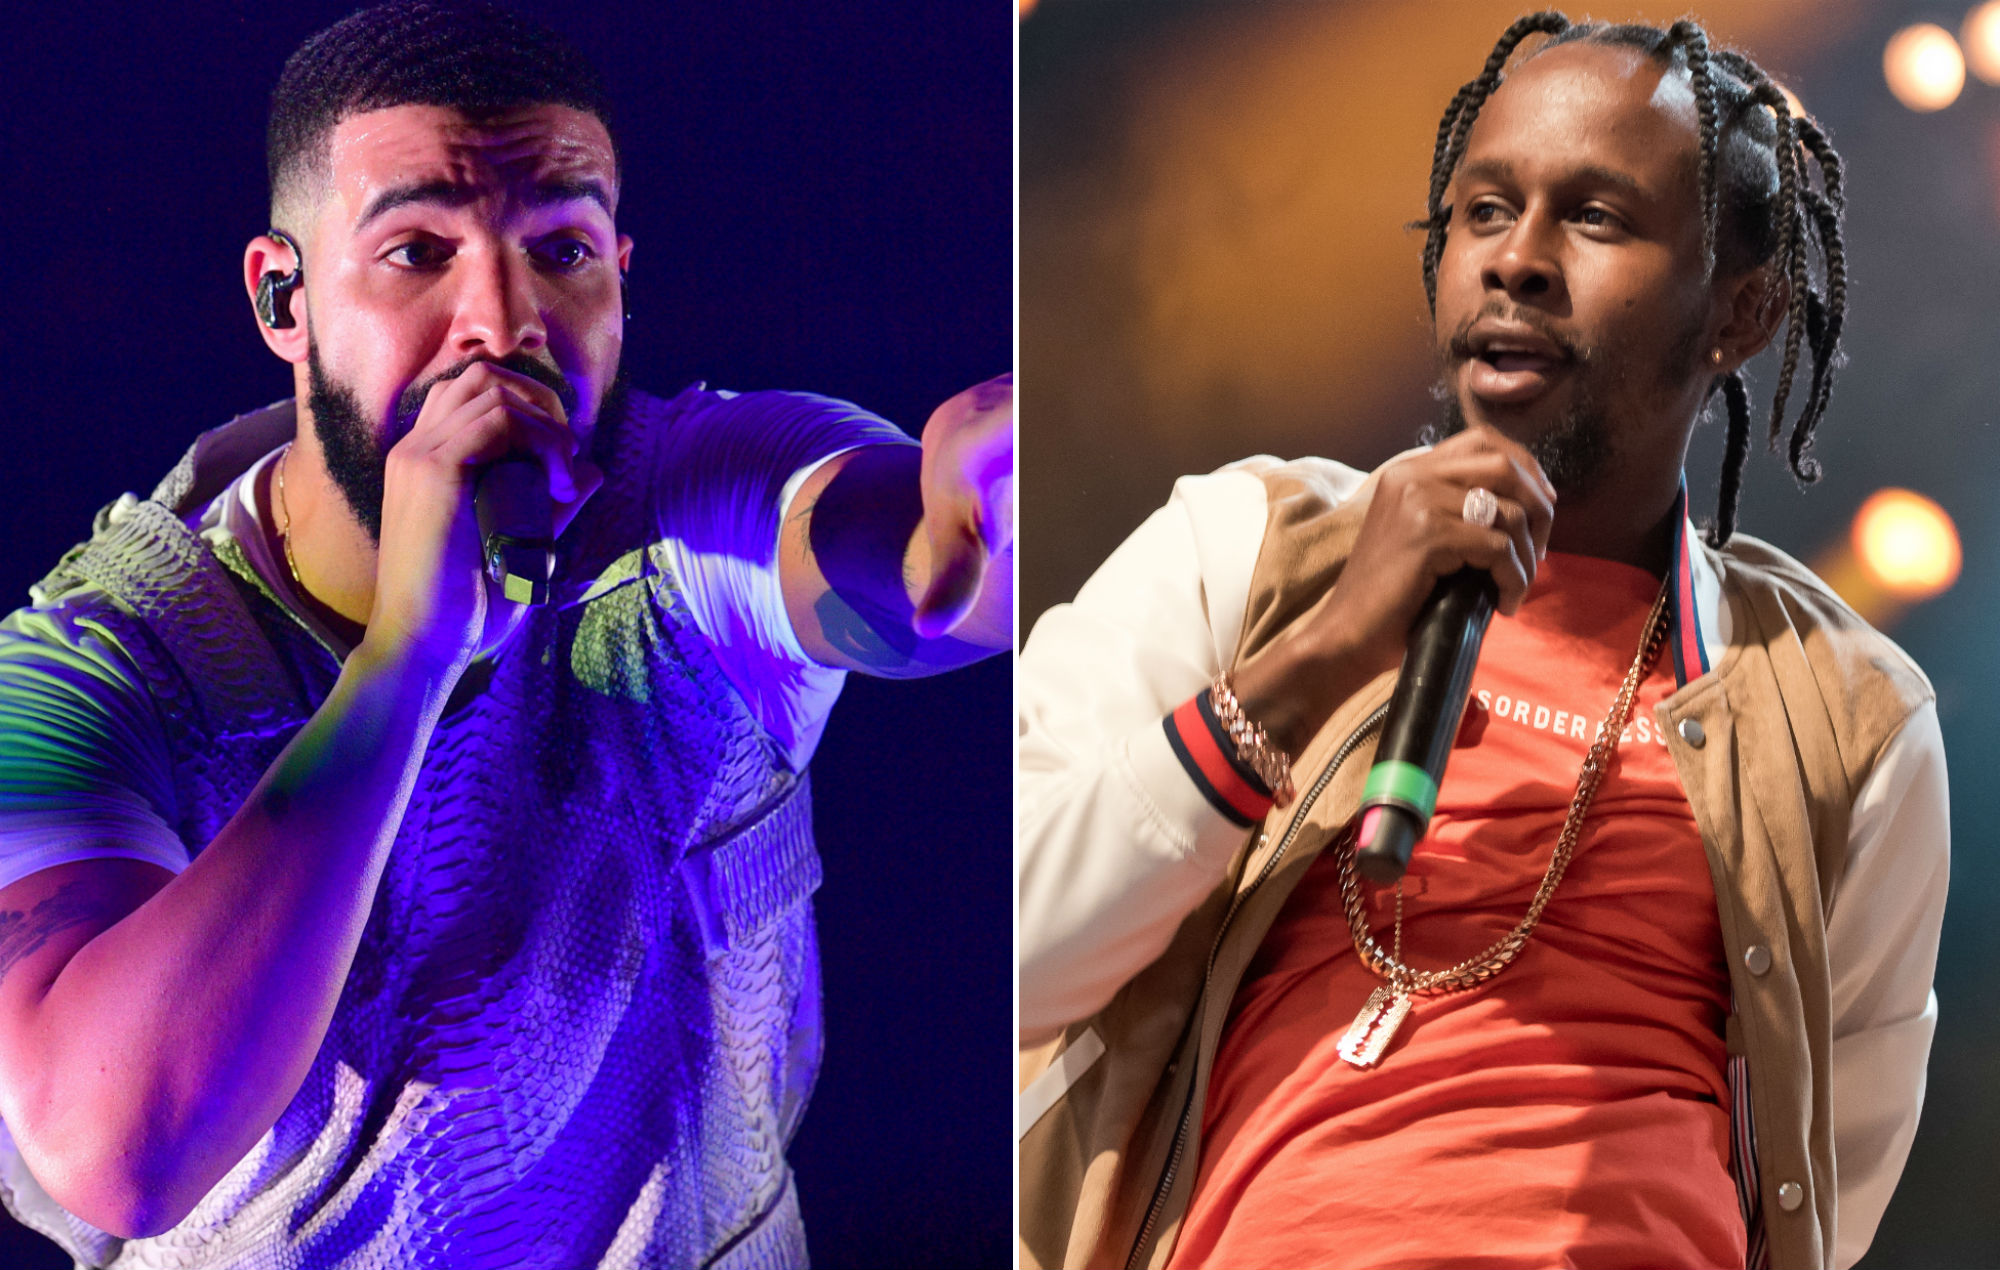 This Week Sees The Release Of A New Collaboration By Drake & Popcaan